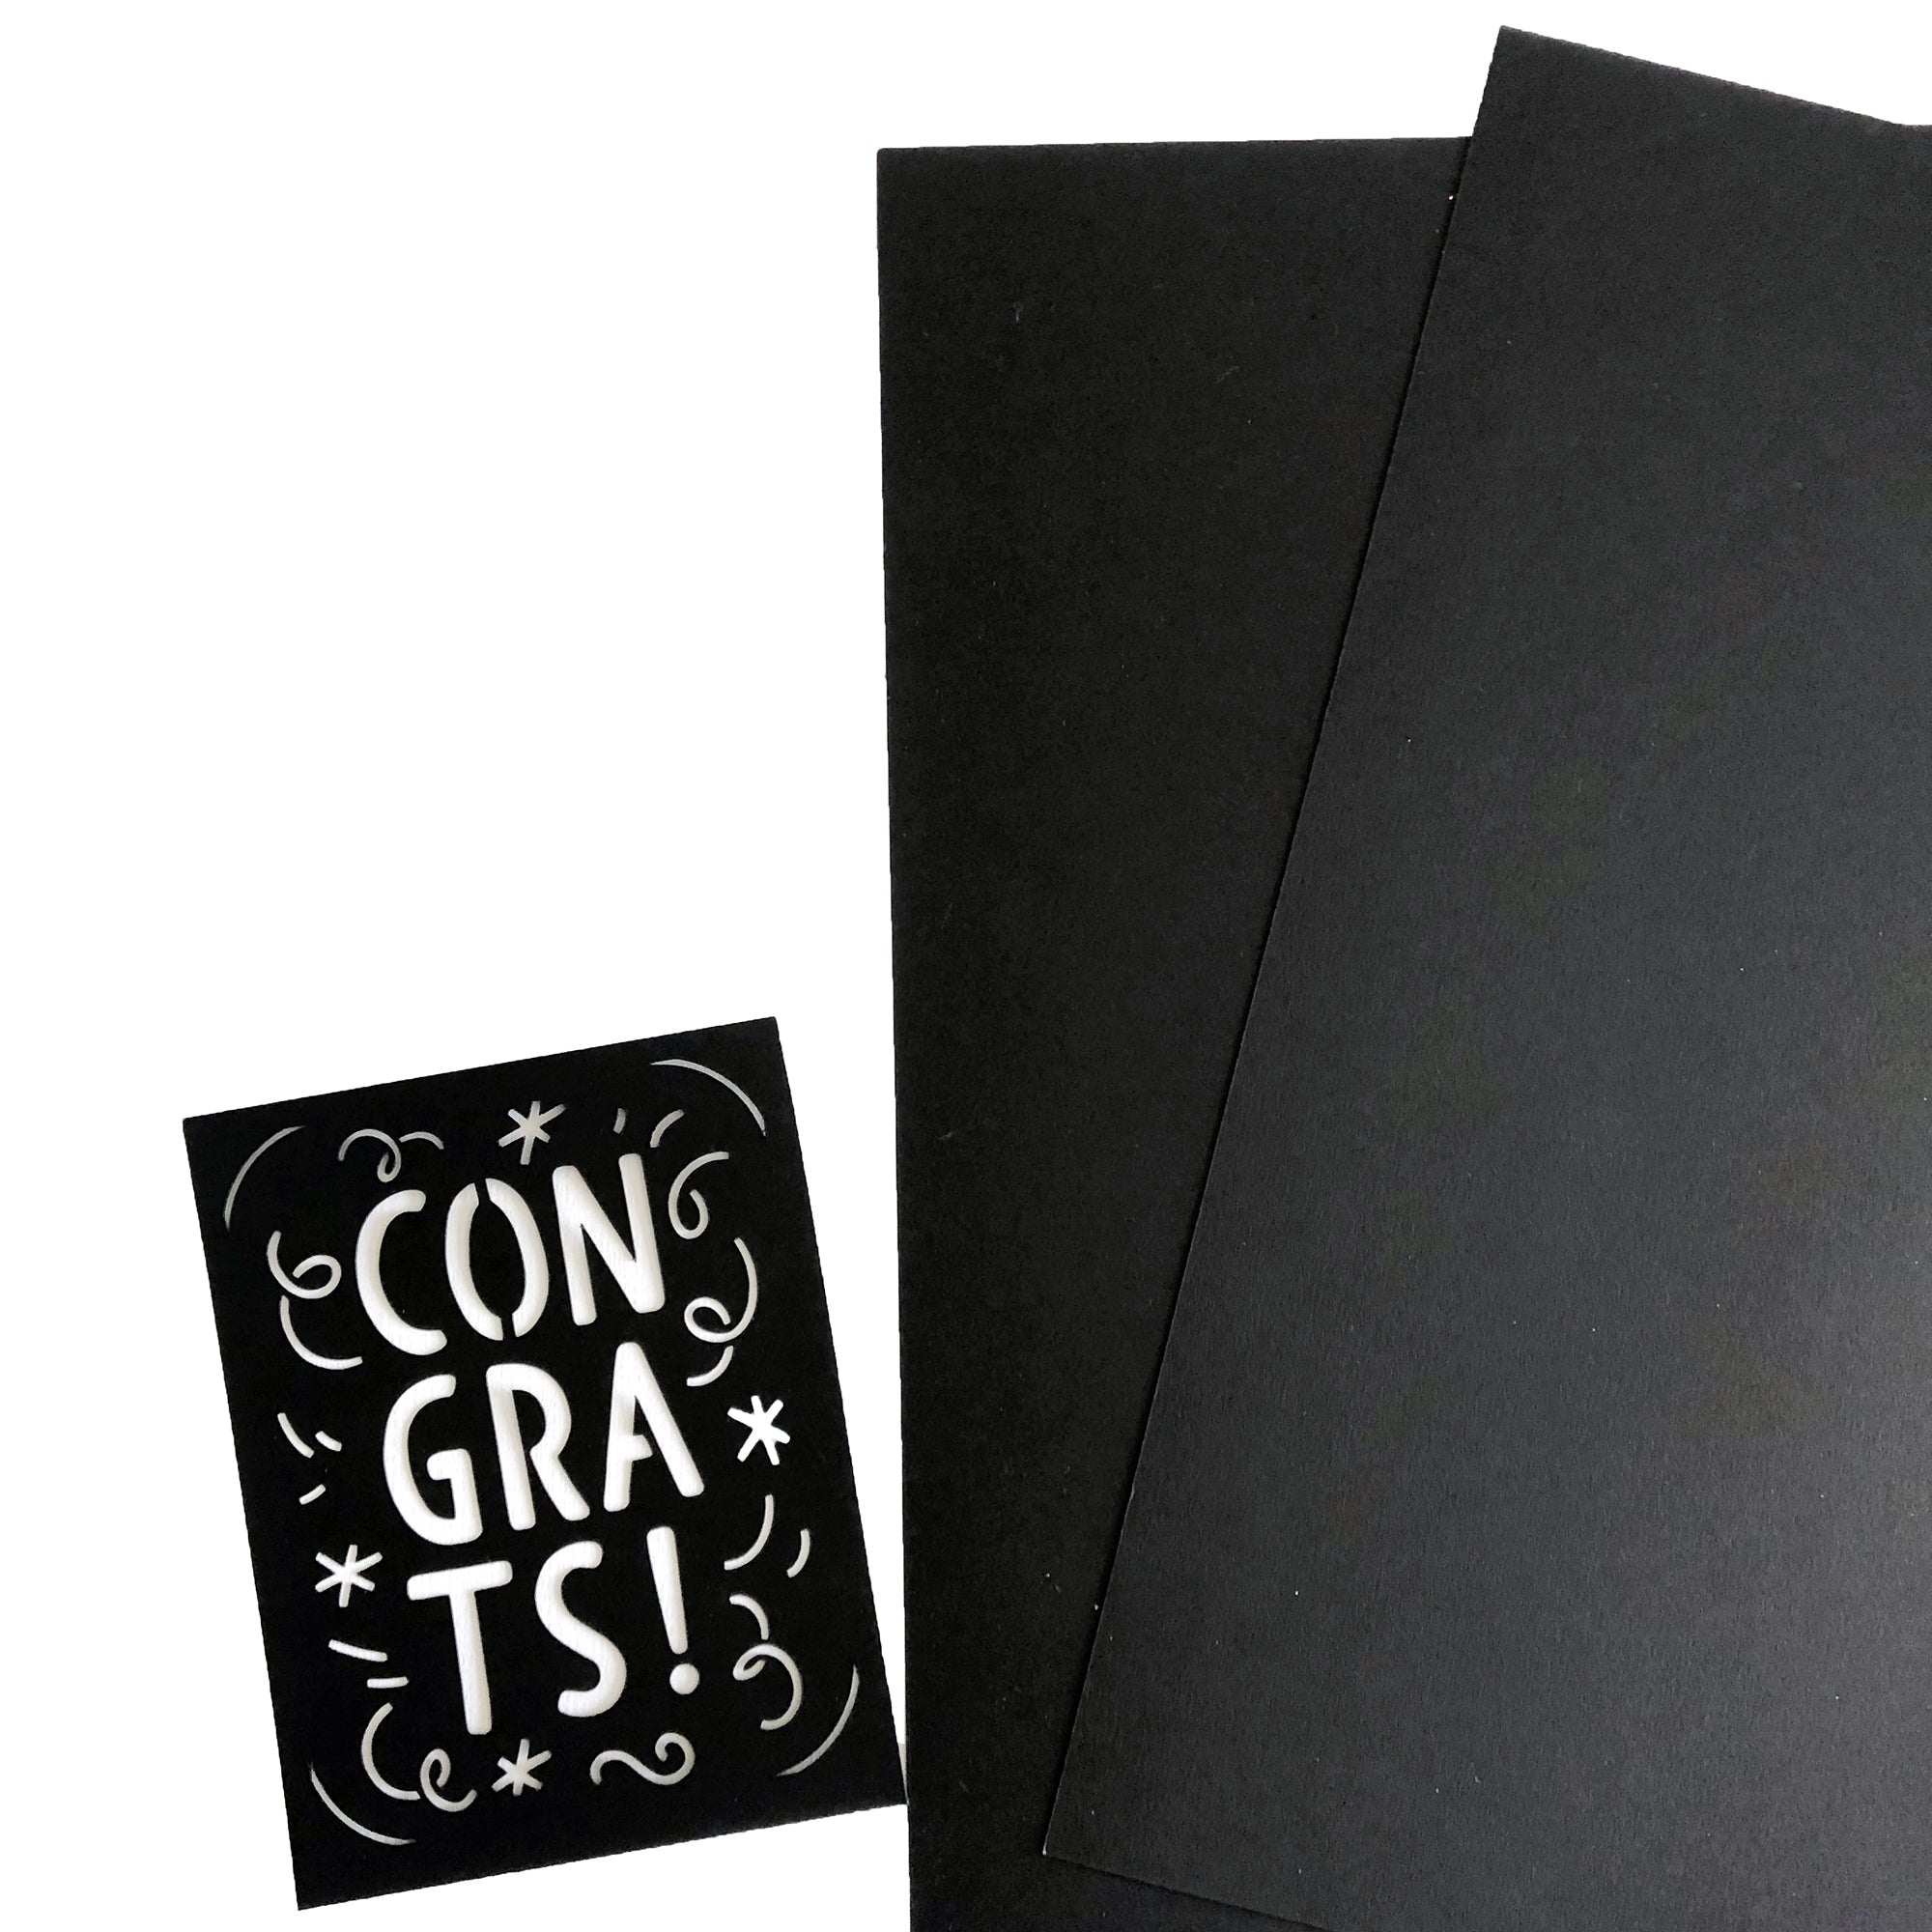 Sirio Color Anthracite Half-Fold Cards – Cardstock Warehouse